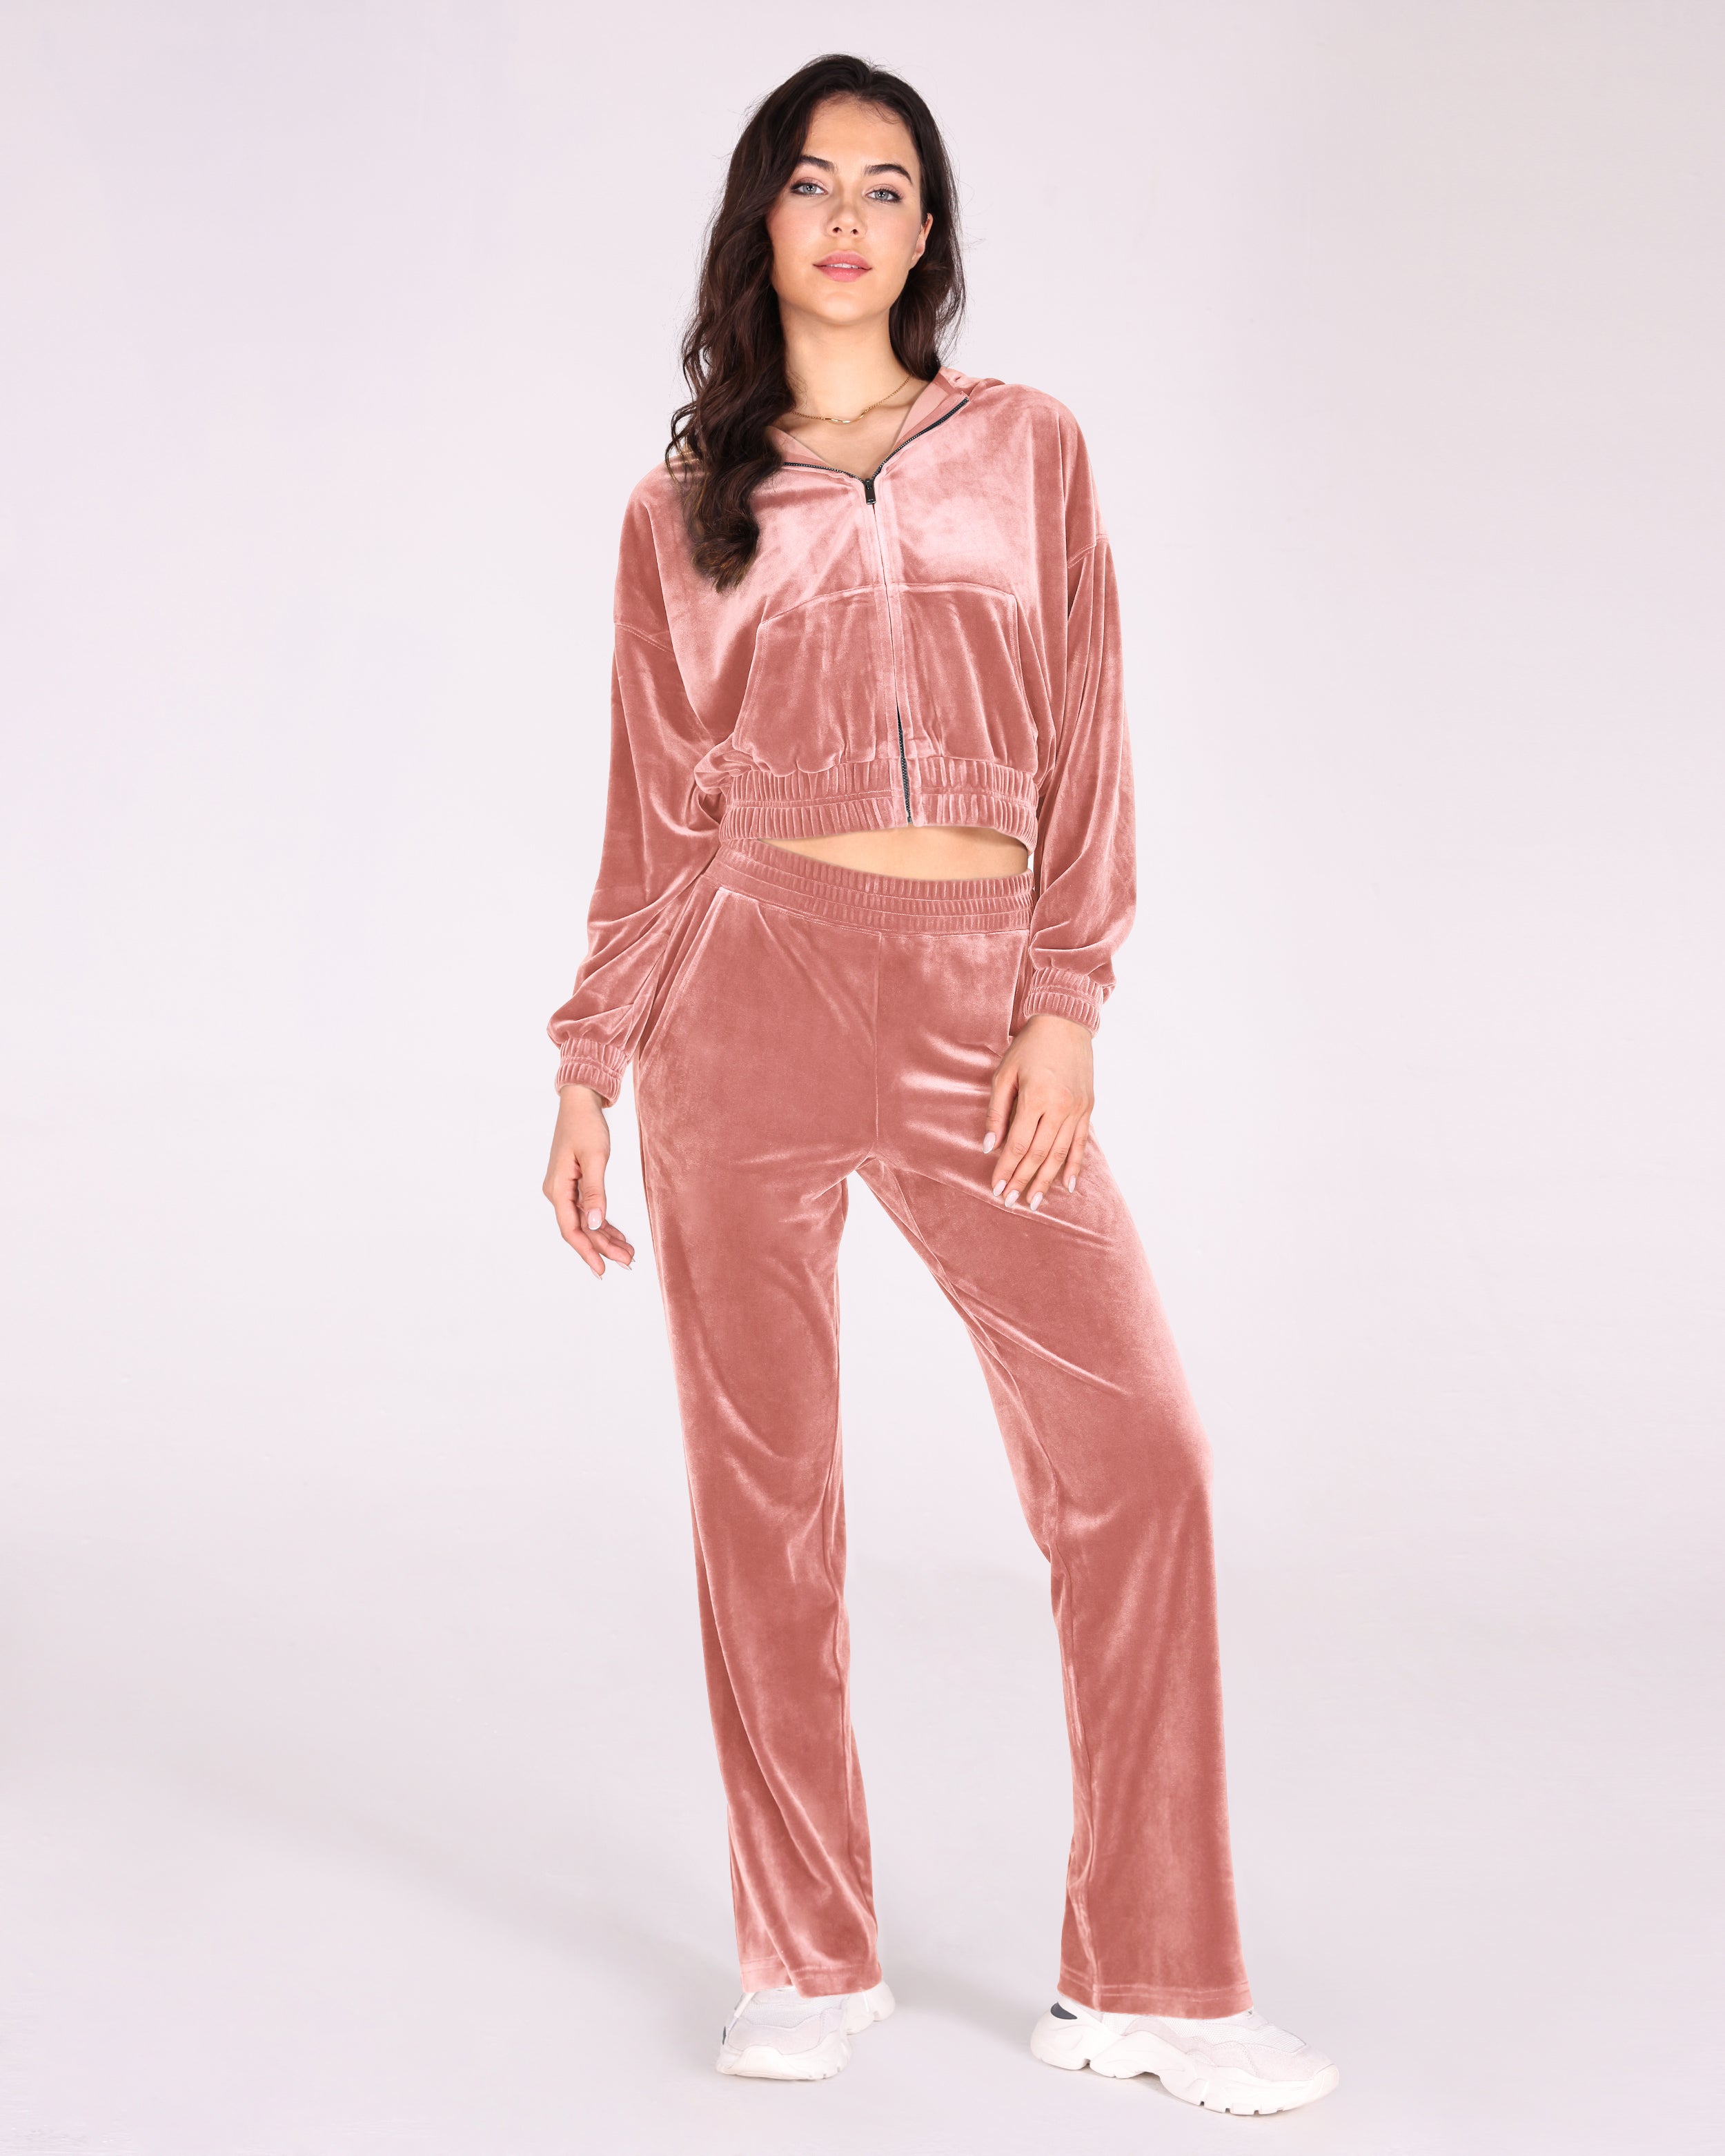 Velour Tracksuit 2 Piece Outfits Long Sleeve Cropped Zip Hooded Sweatshirt & Track Pants Set Pink - ododos